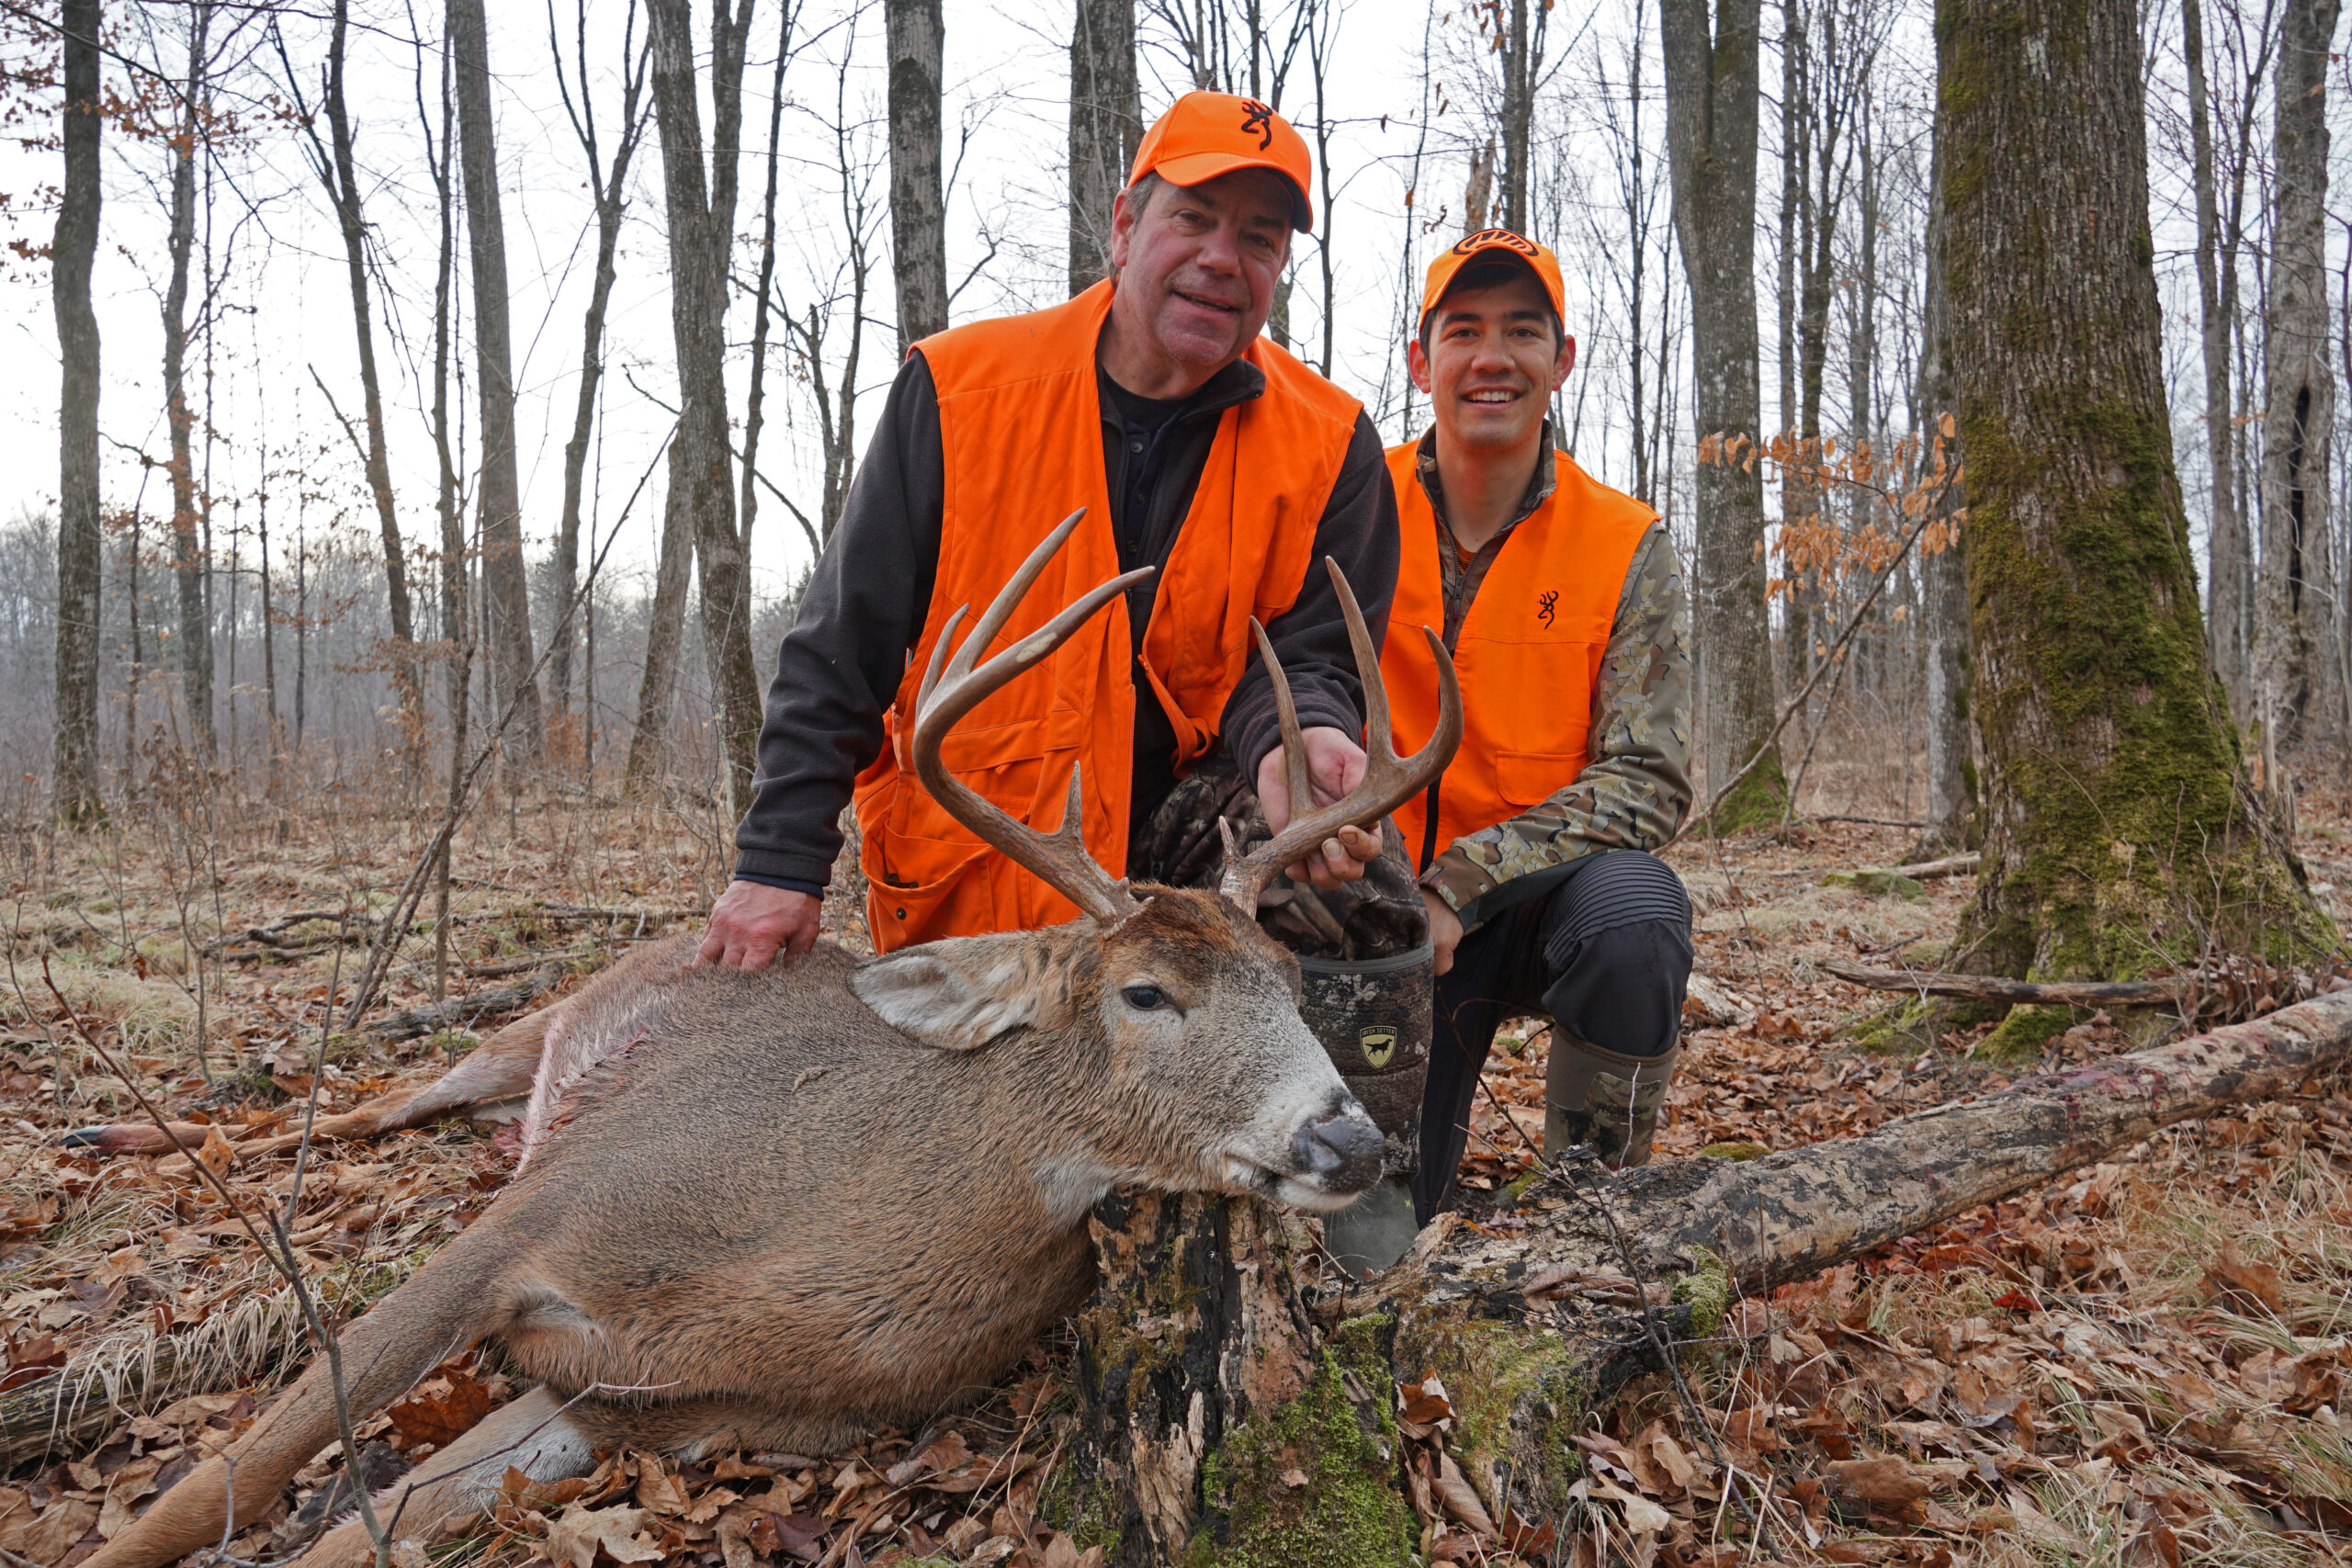 The Midwest and South (Not the West) Are the Heartbeat of Hunting